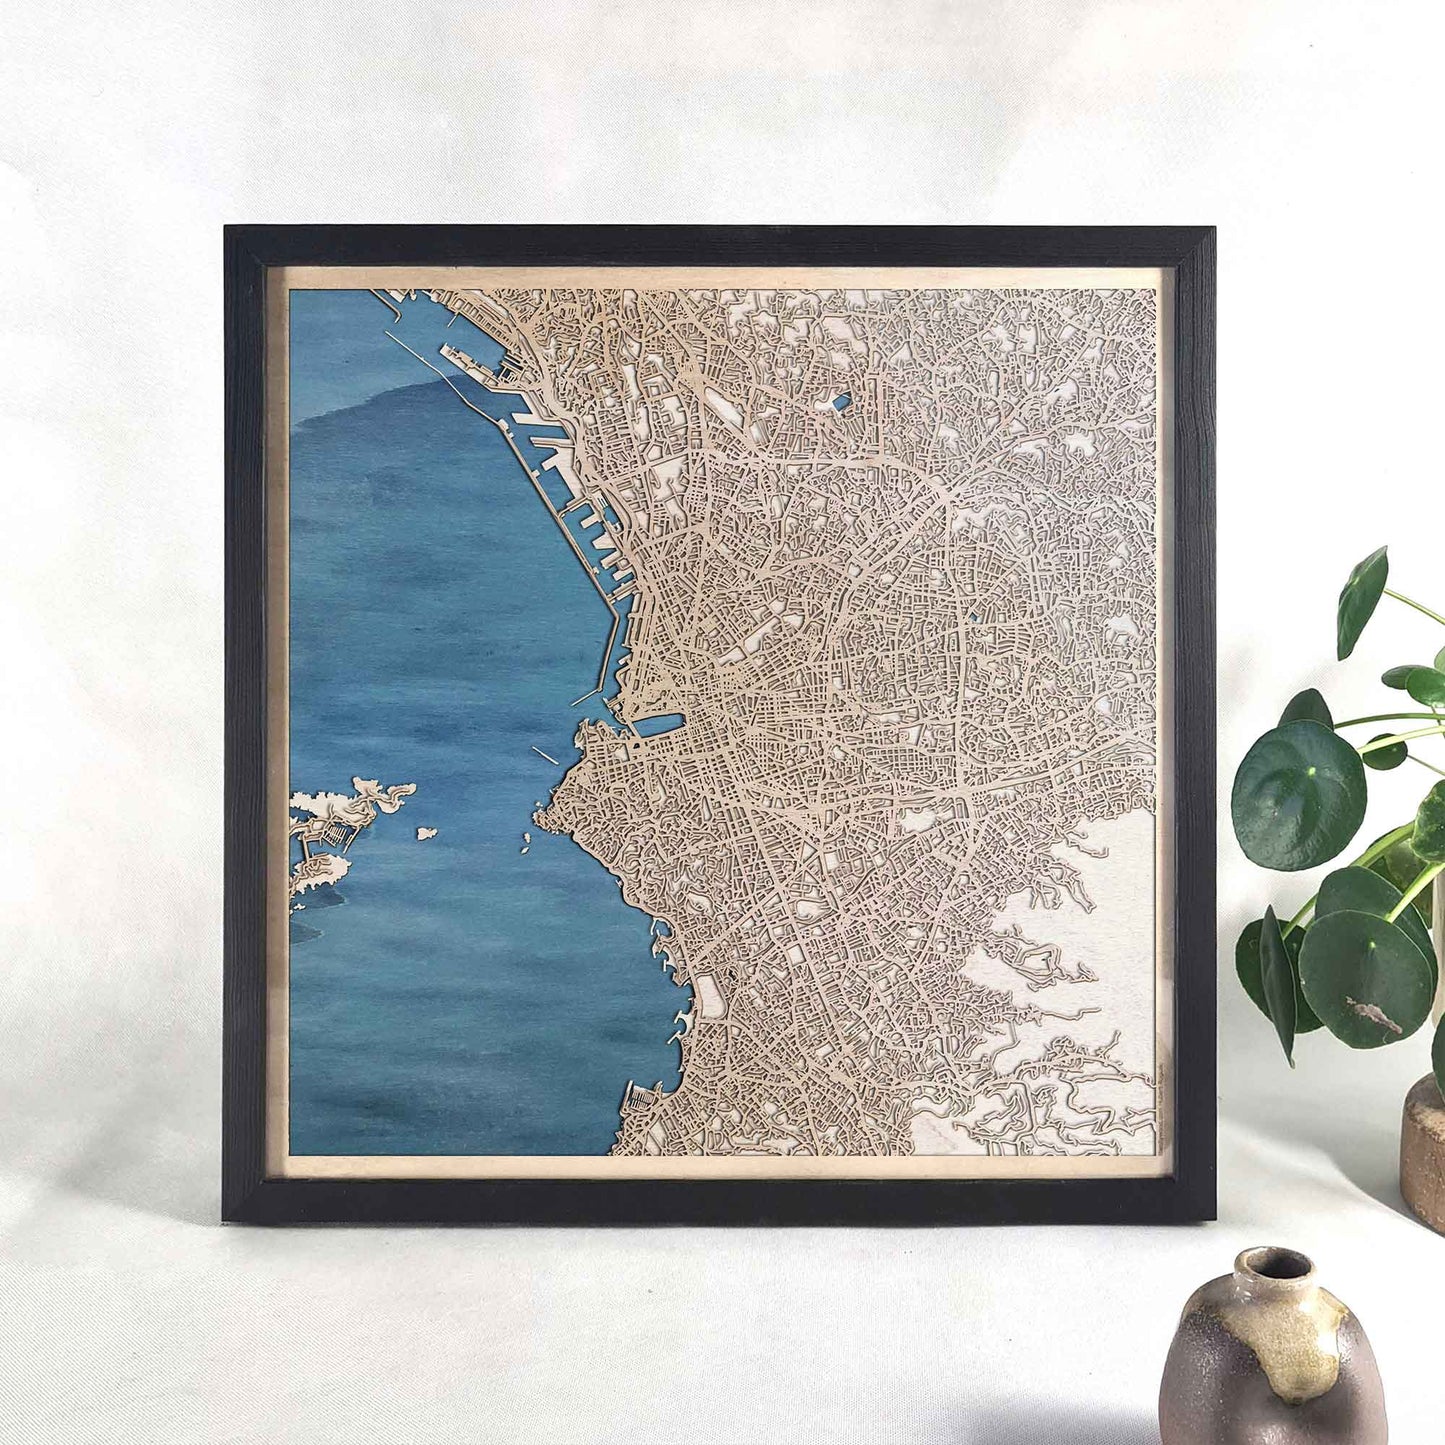 Marseille Wooden Map by CityWood - Custom Wood Map Art - Unique Laser Cut Engraved - Anniversary Gift